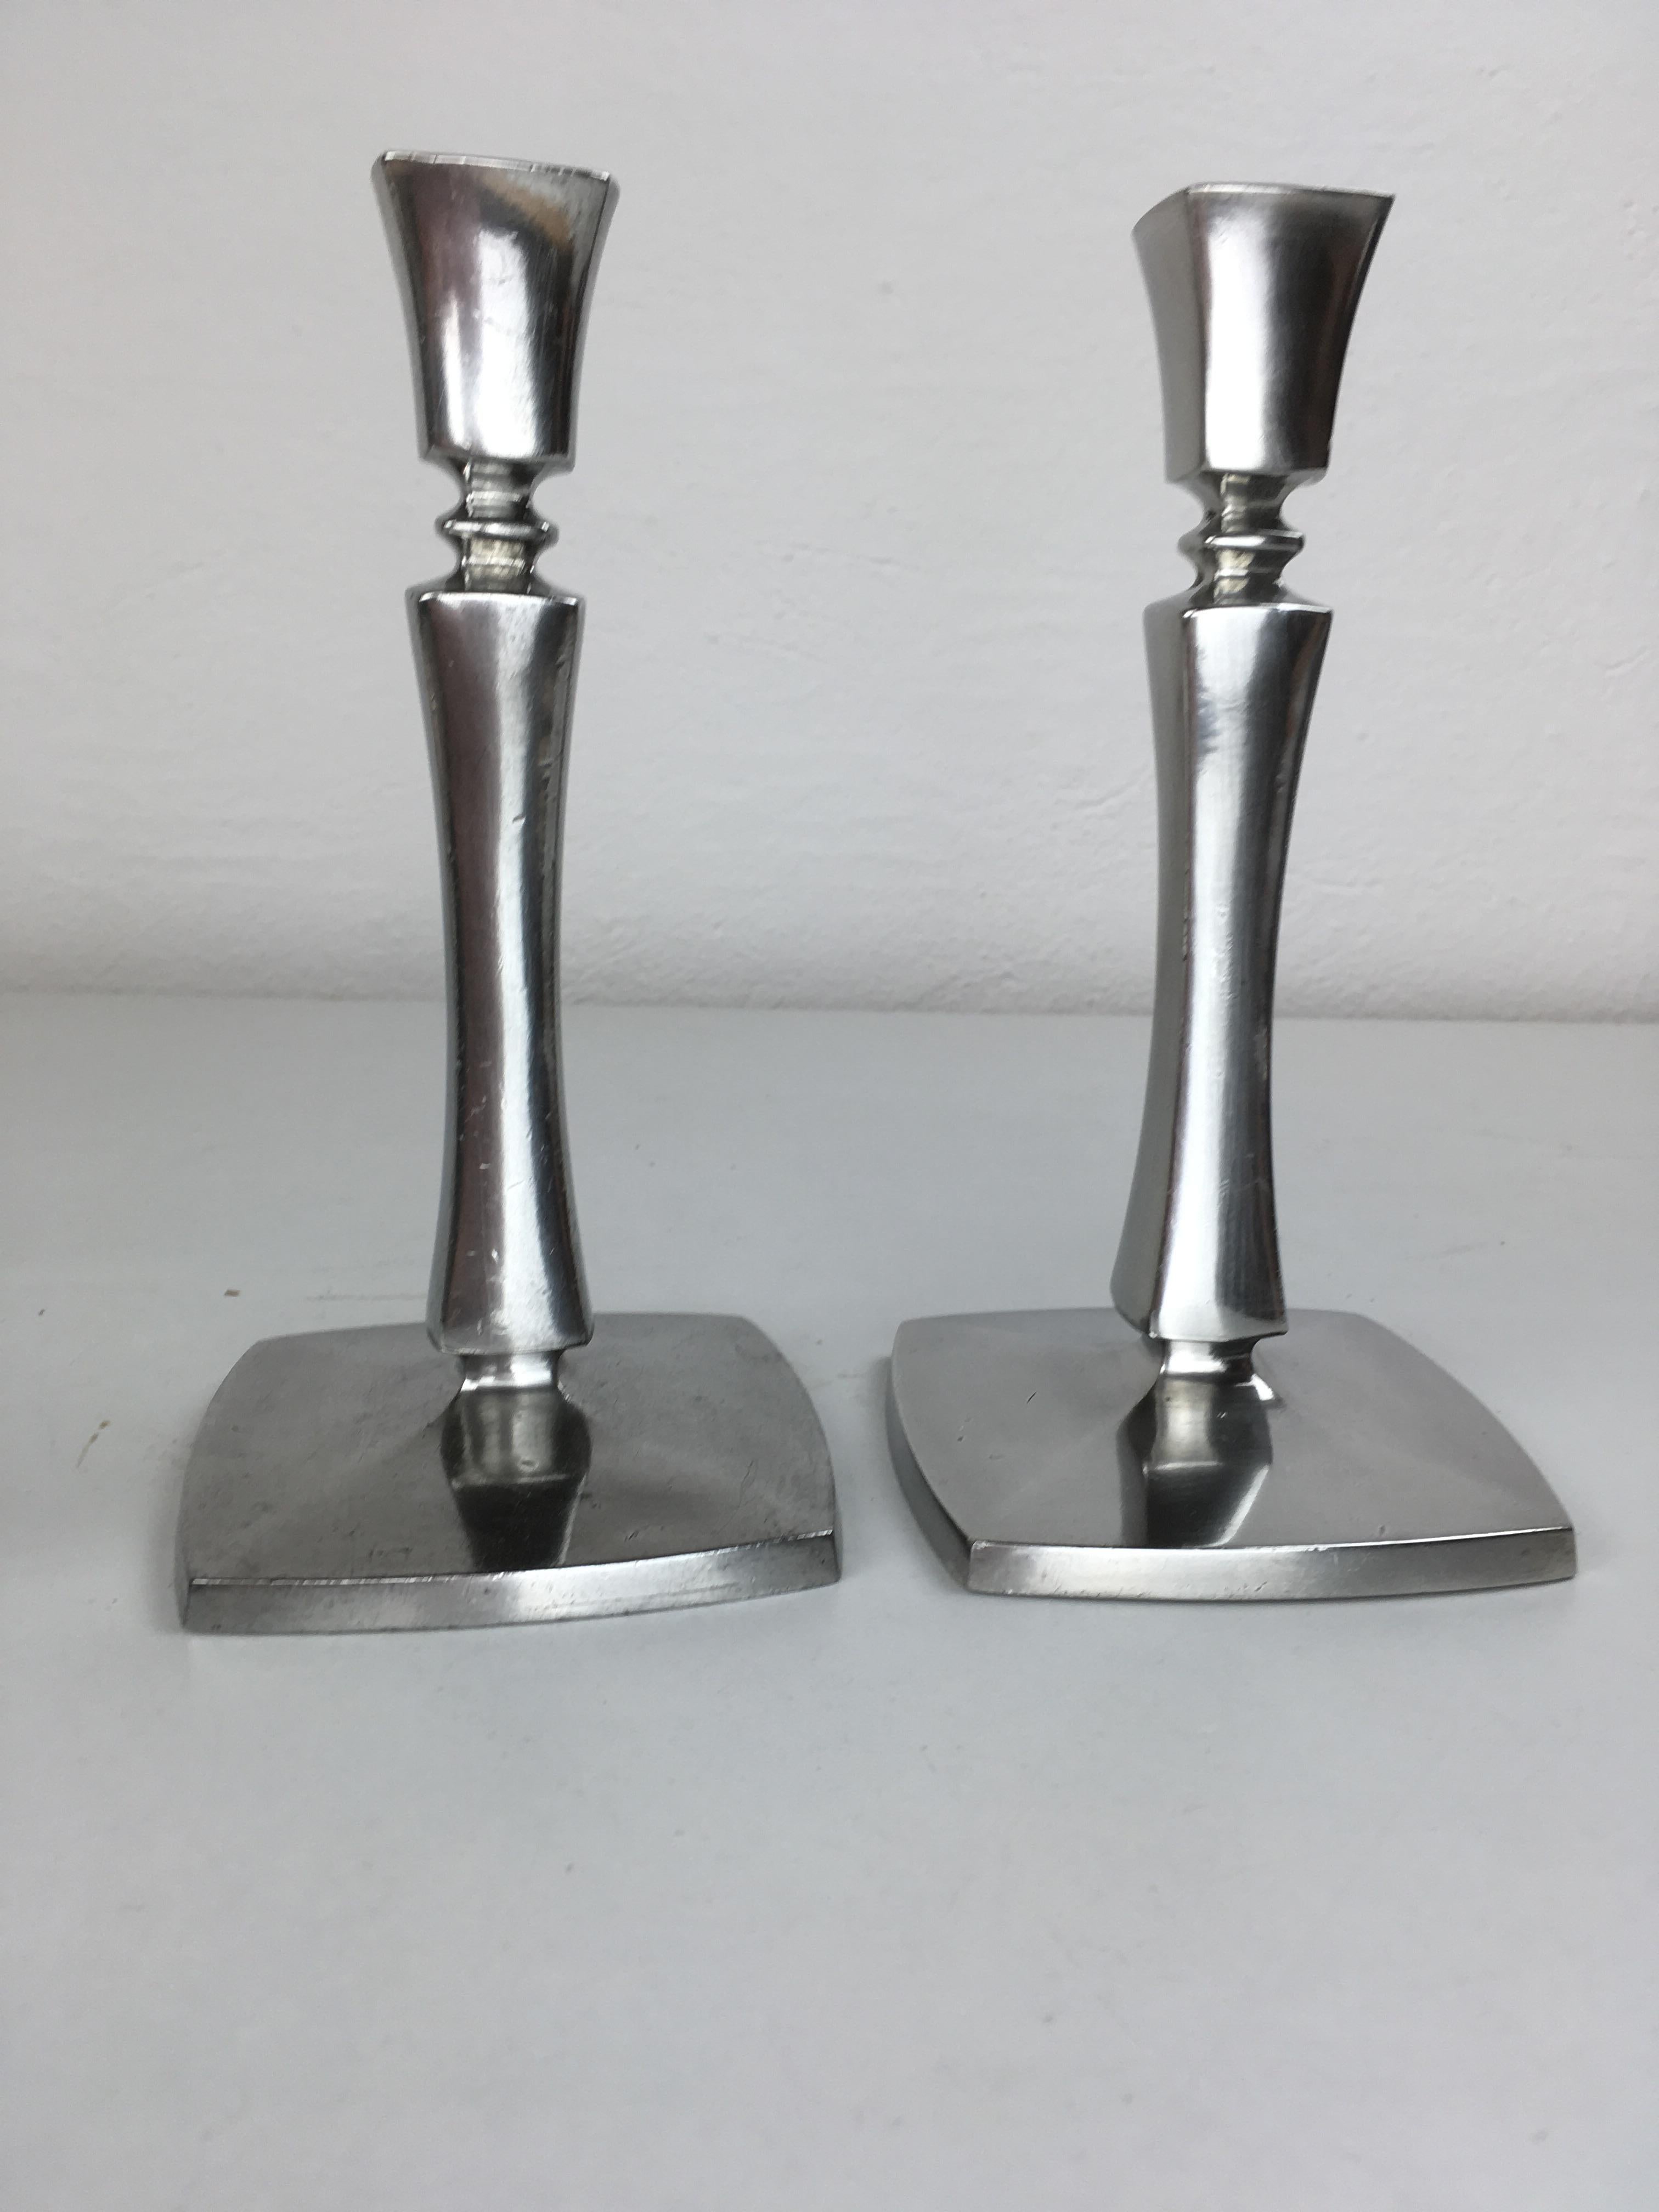 Set of two Danish Just Andersen pewter candle holders produced by Just Andersen A/S in the 1940's.

The well designed candle holders are in good vintage condition and marked with Just. Andersens triangle mark. 

Just Andersen 1884-1943 was born